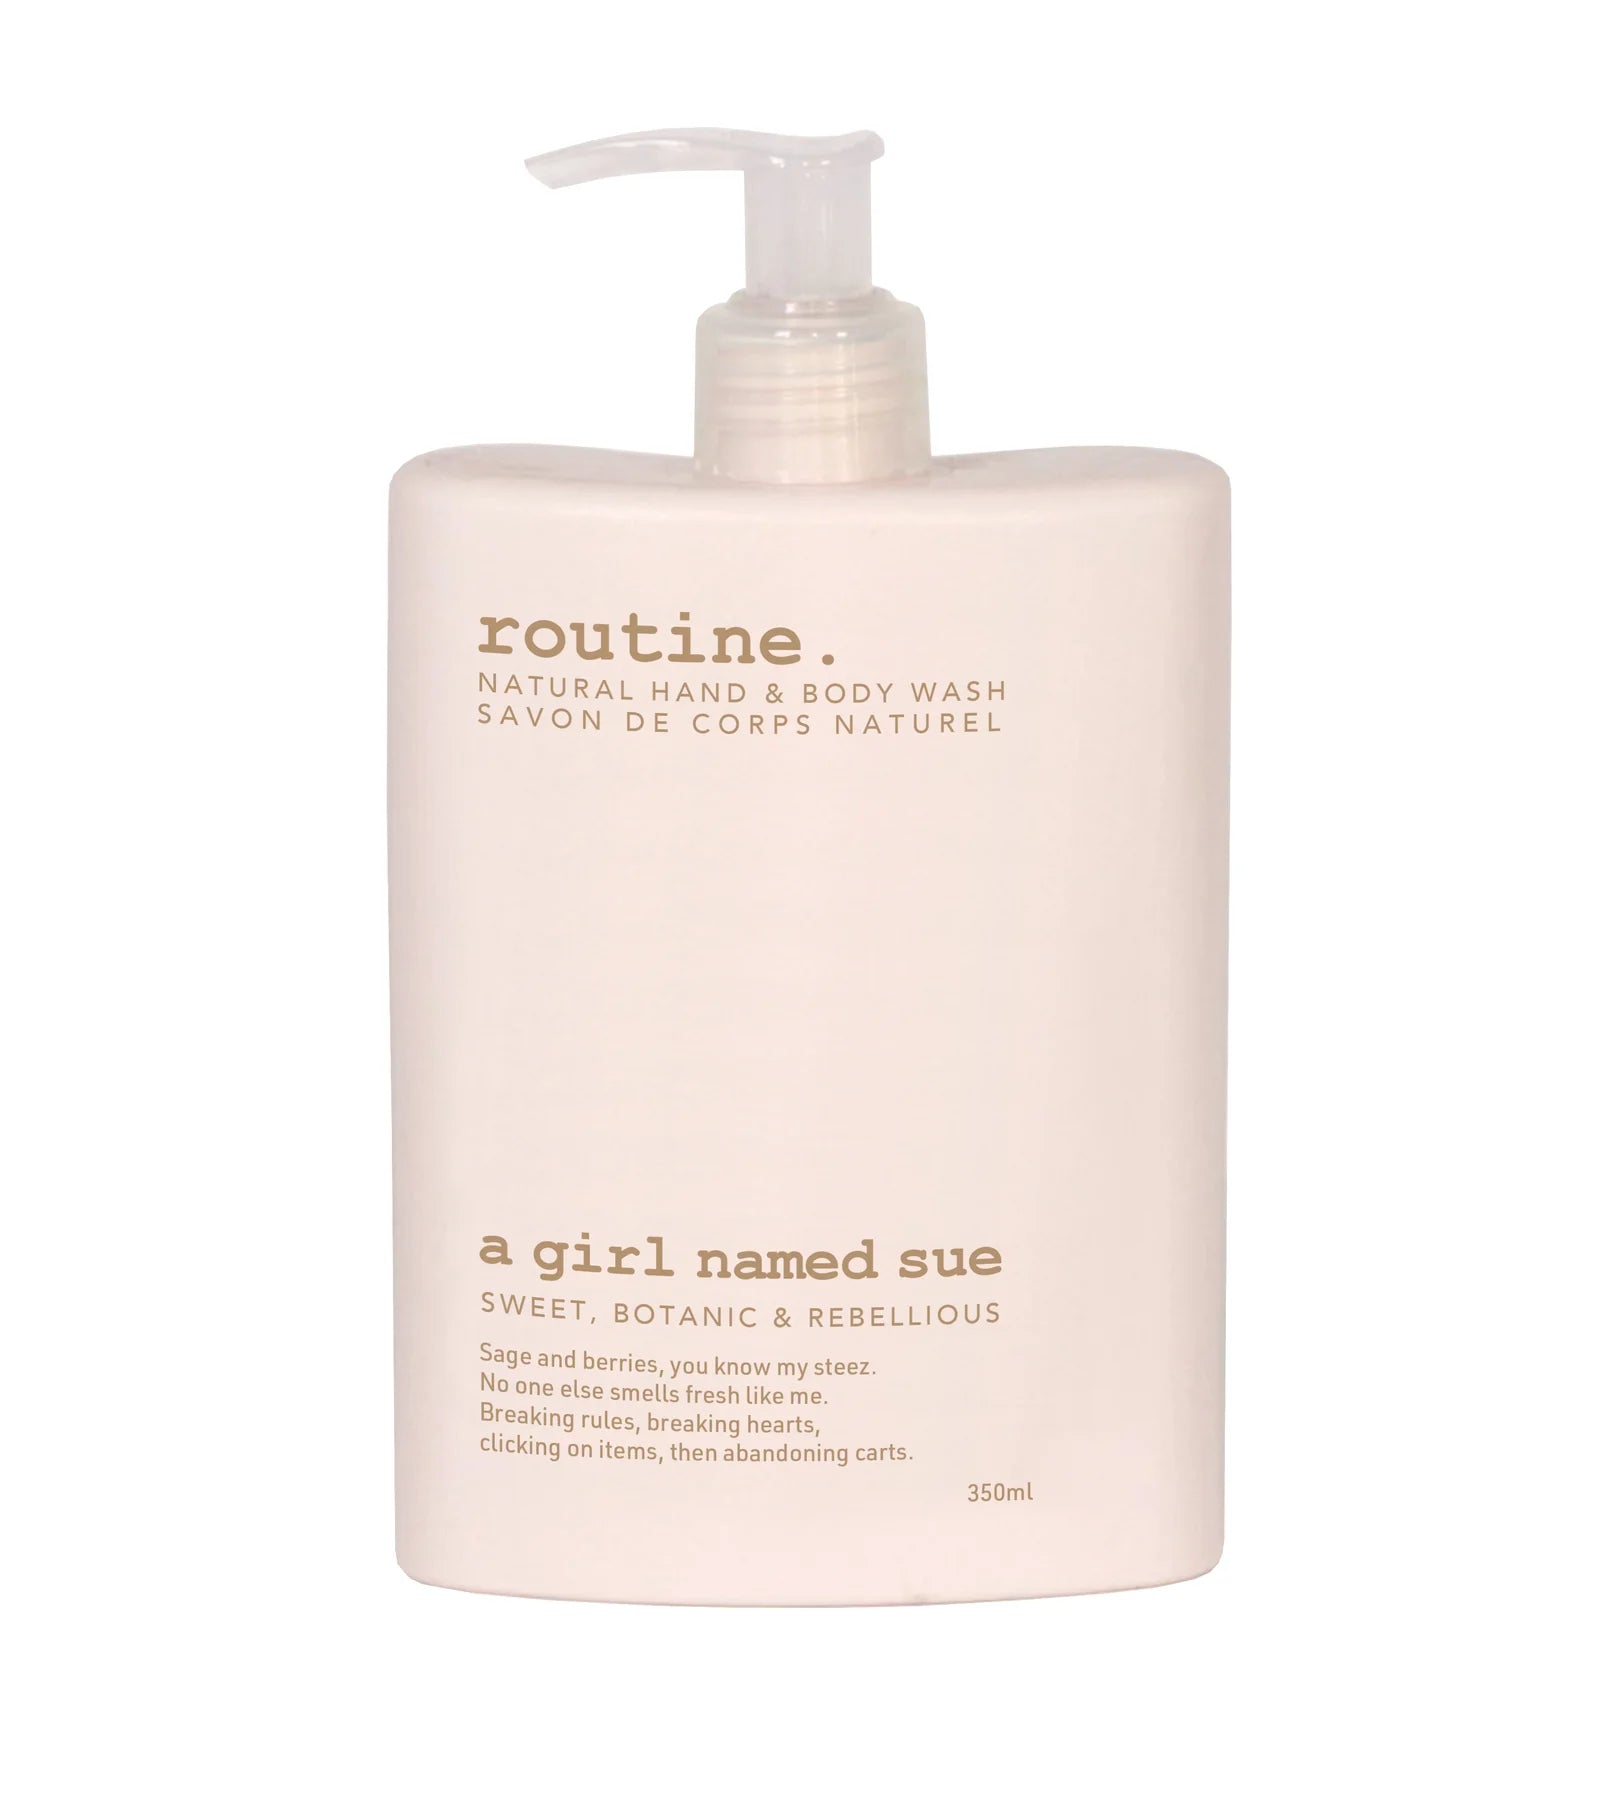 Routine | A Girl Named Sue Natural Hand & Body Wash